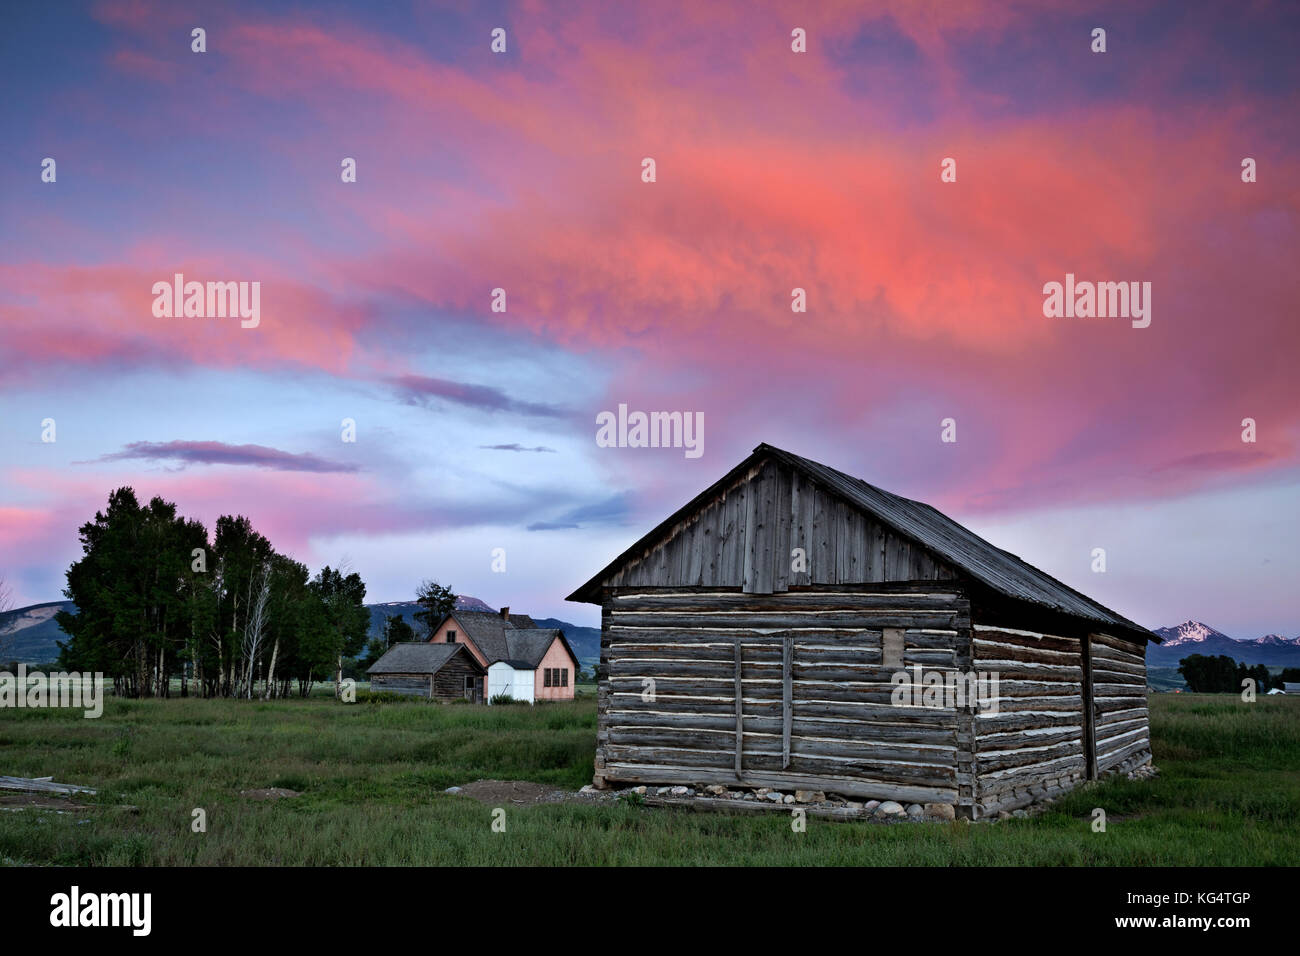 WY02544-00...WYOMING - Sunset over an old homestead on Mormon Row in Grand Teton National Park. Stock Photo